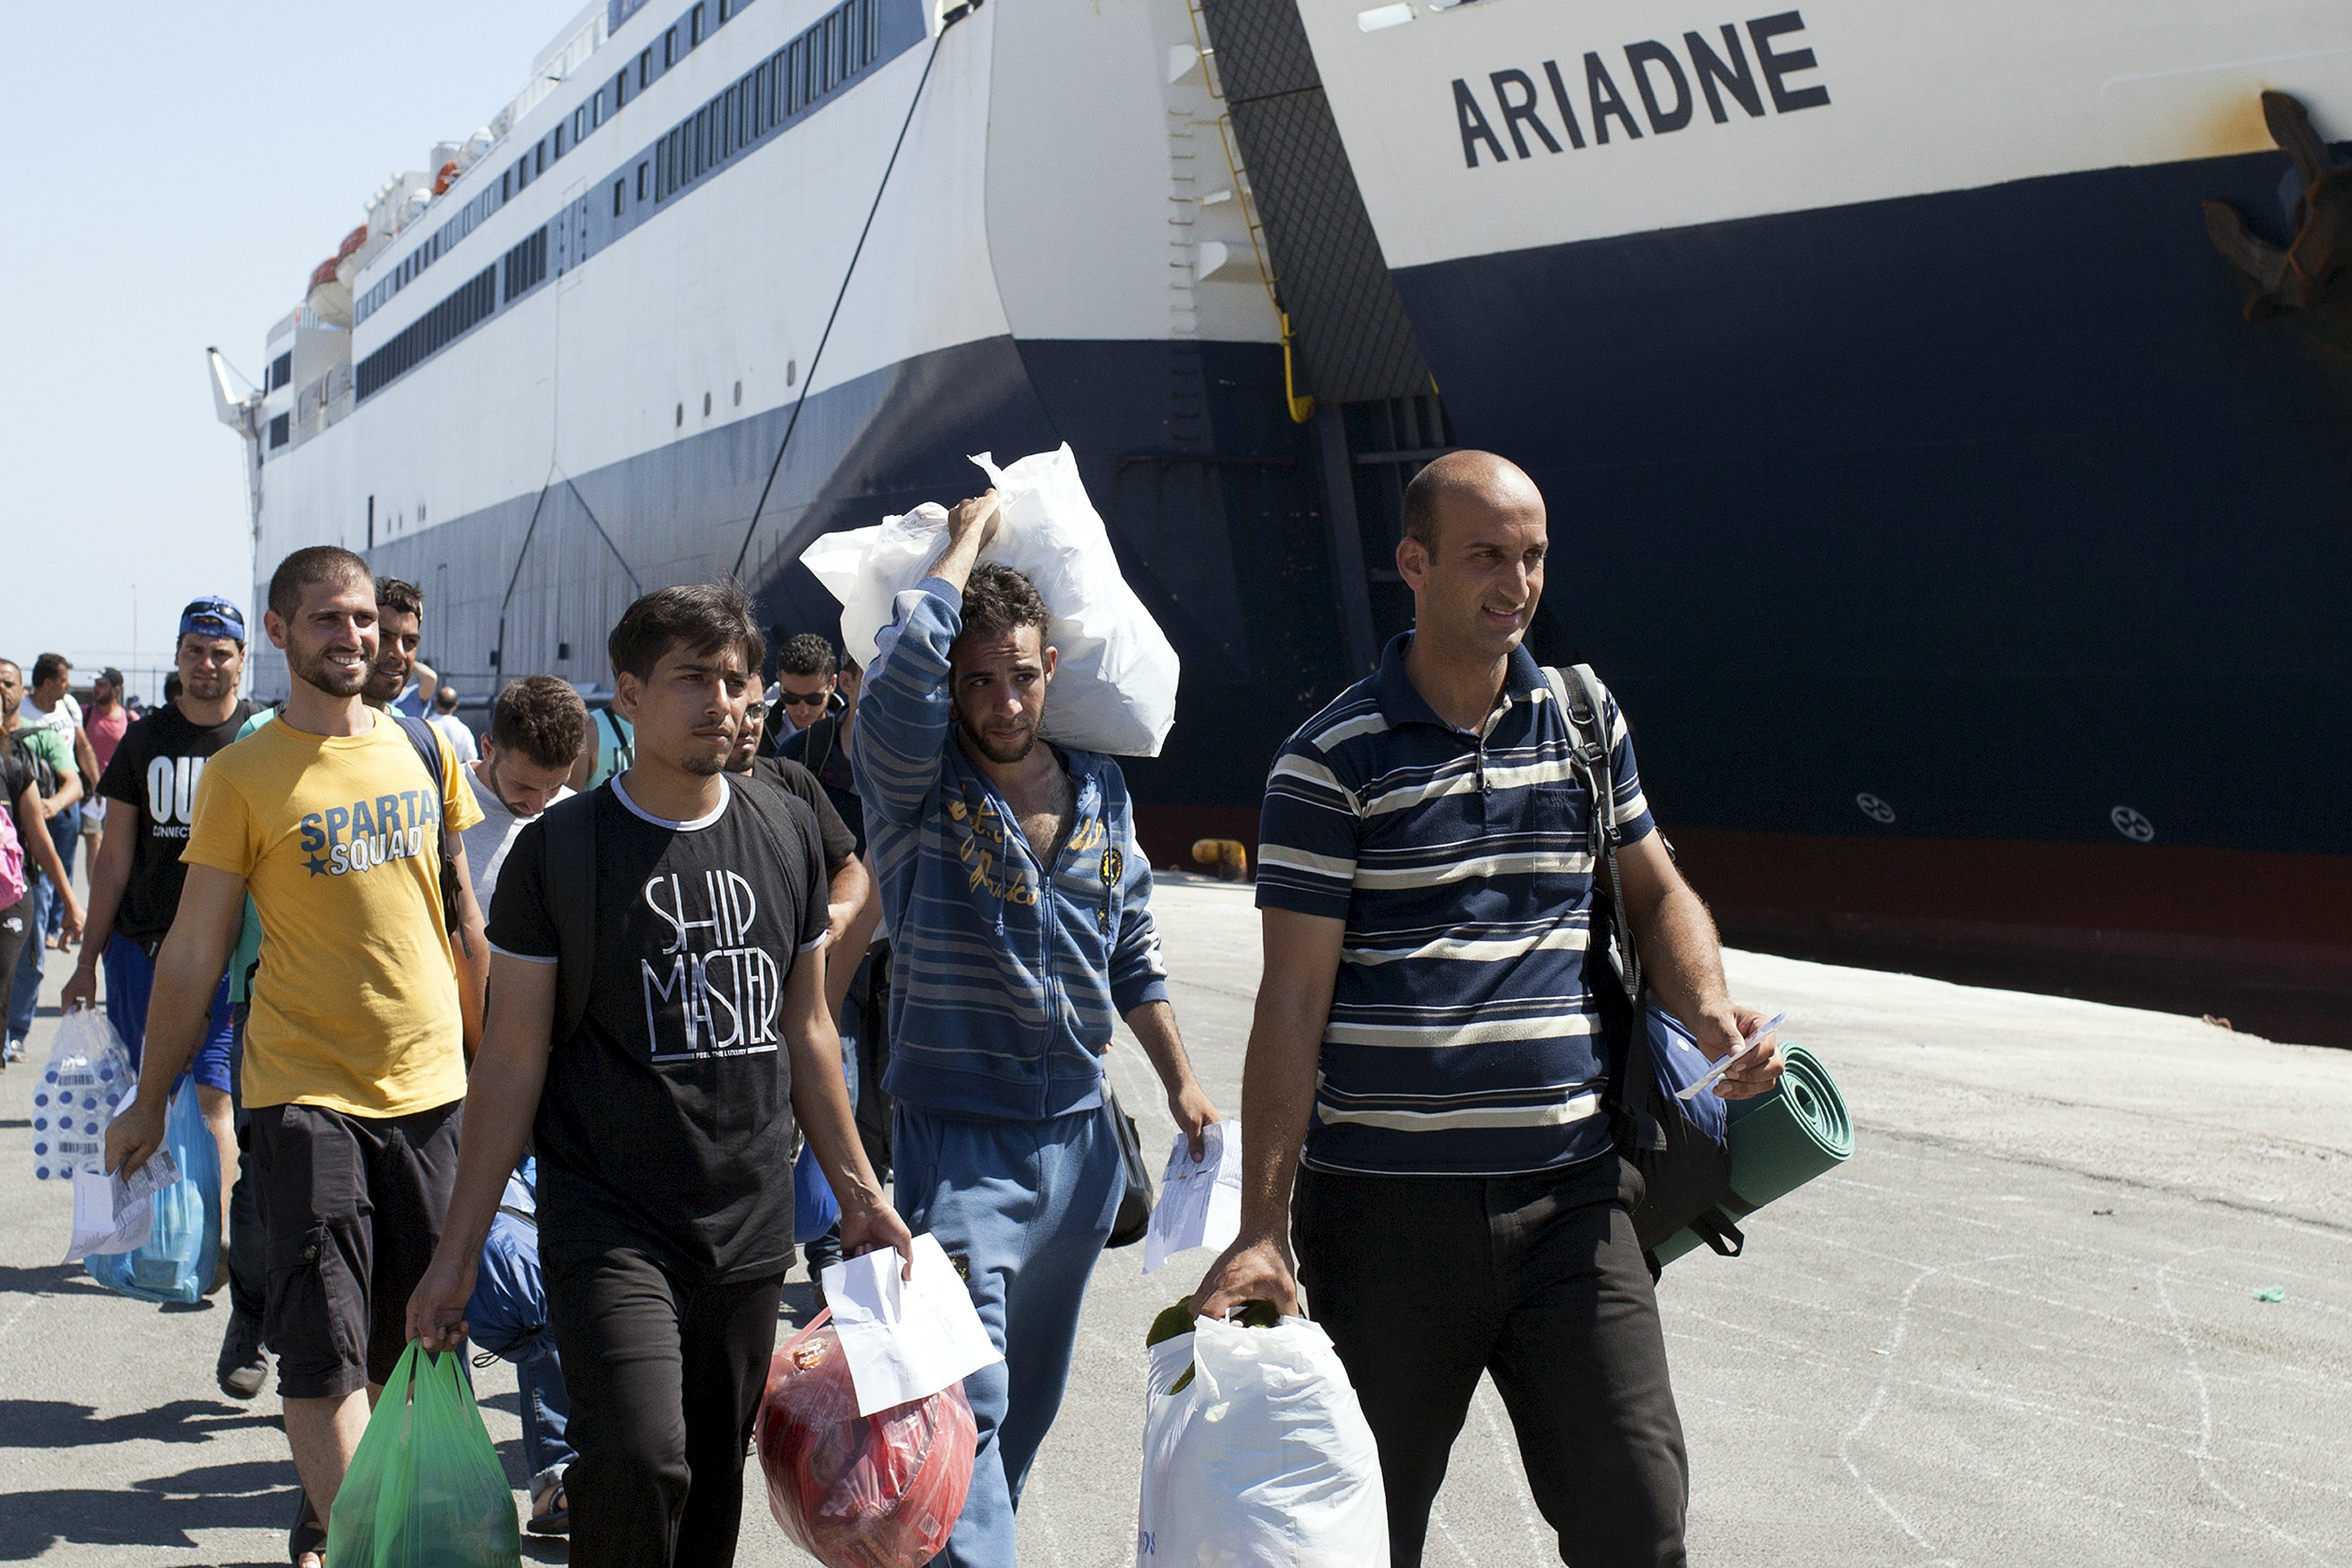 Refugees and migrants carry belongings while boarding passenger ship "Tera Jet" heading to port of Piraeus, at port on island of Lesbos